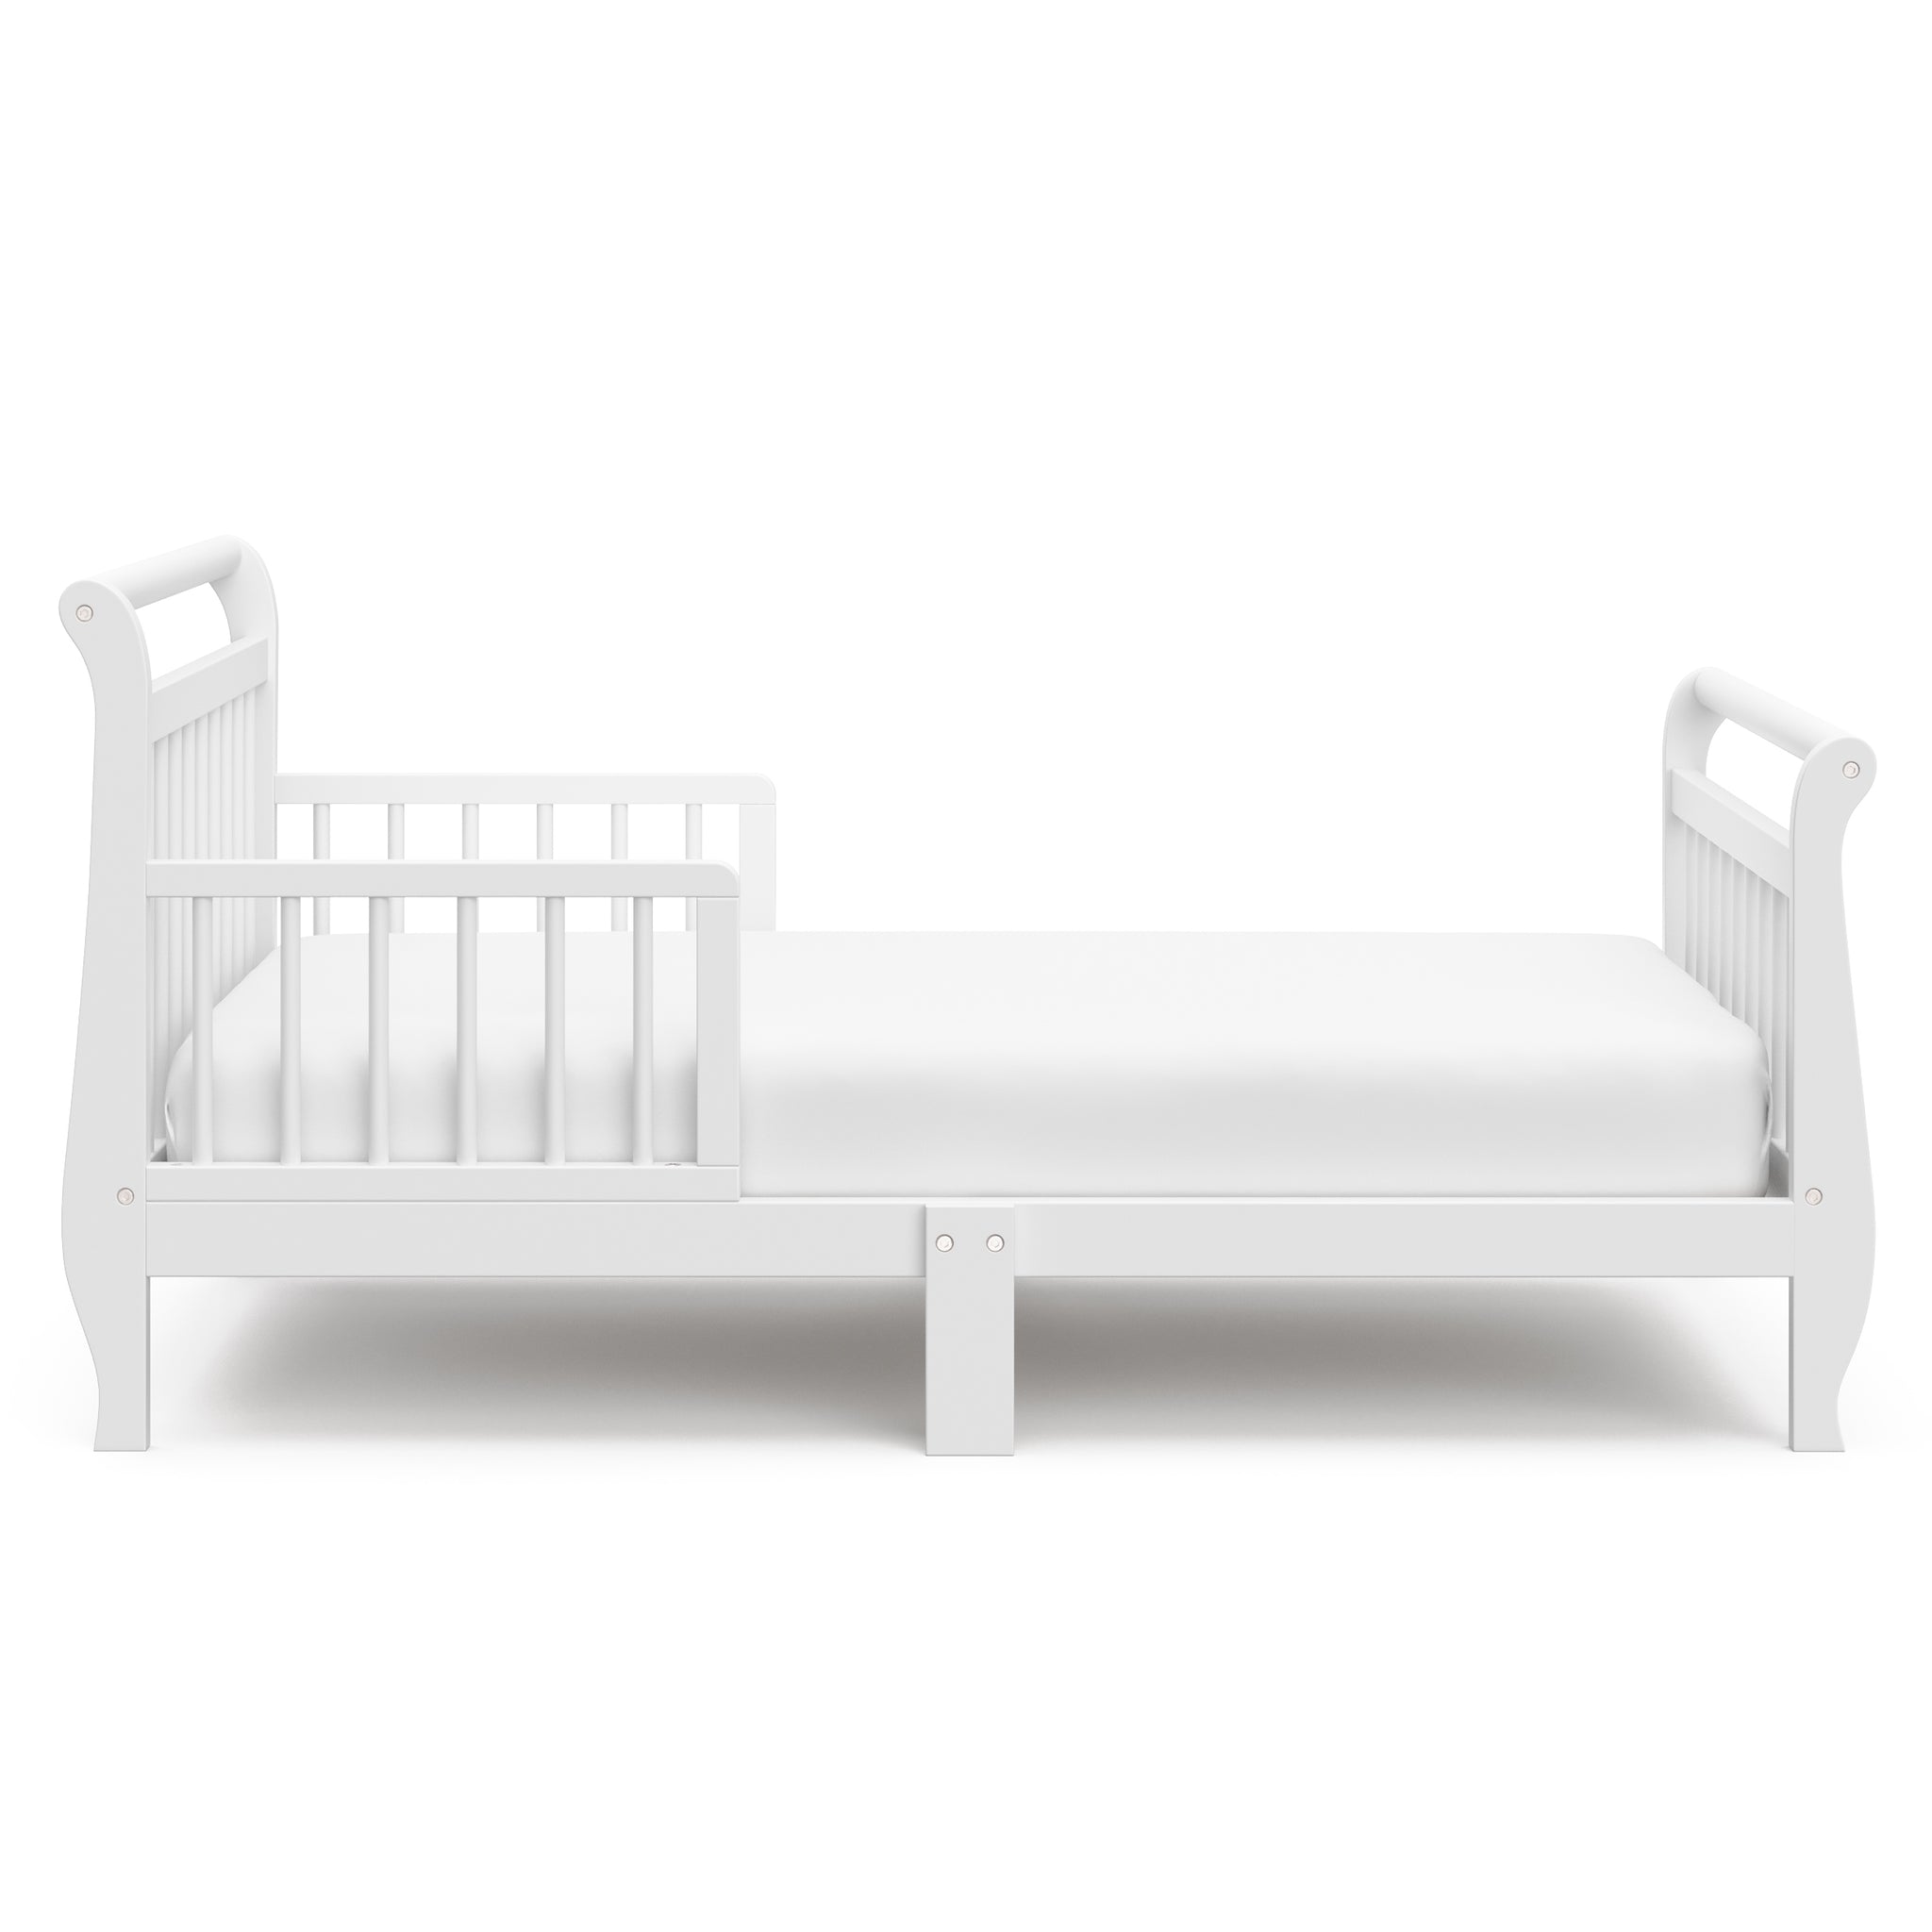 Side view of white toddler bed with guardrails